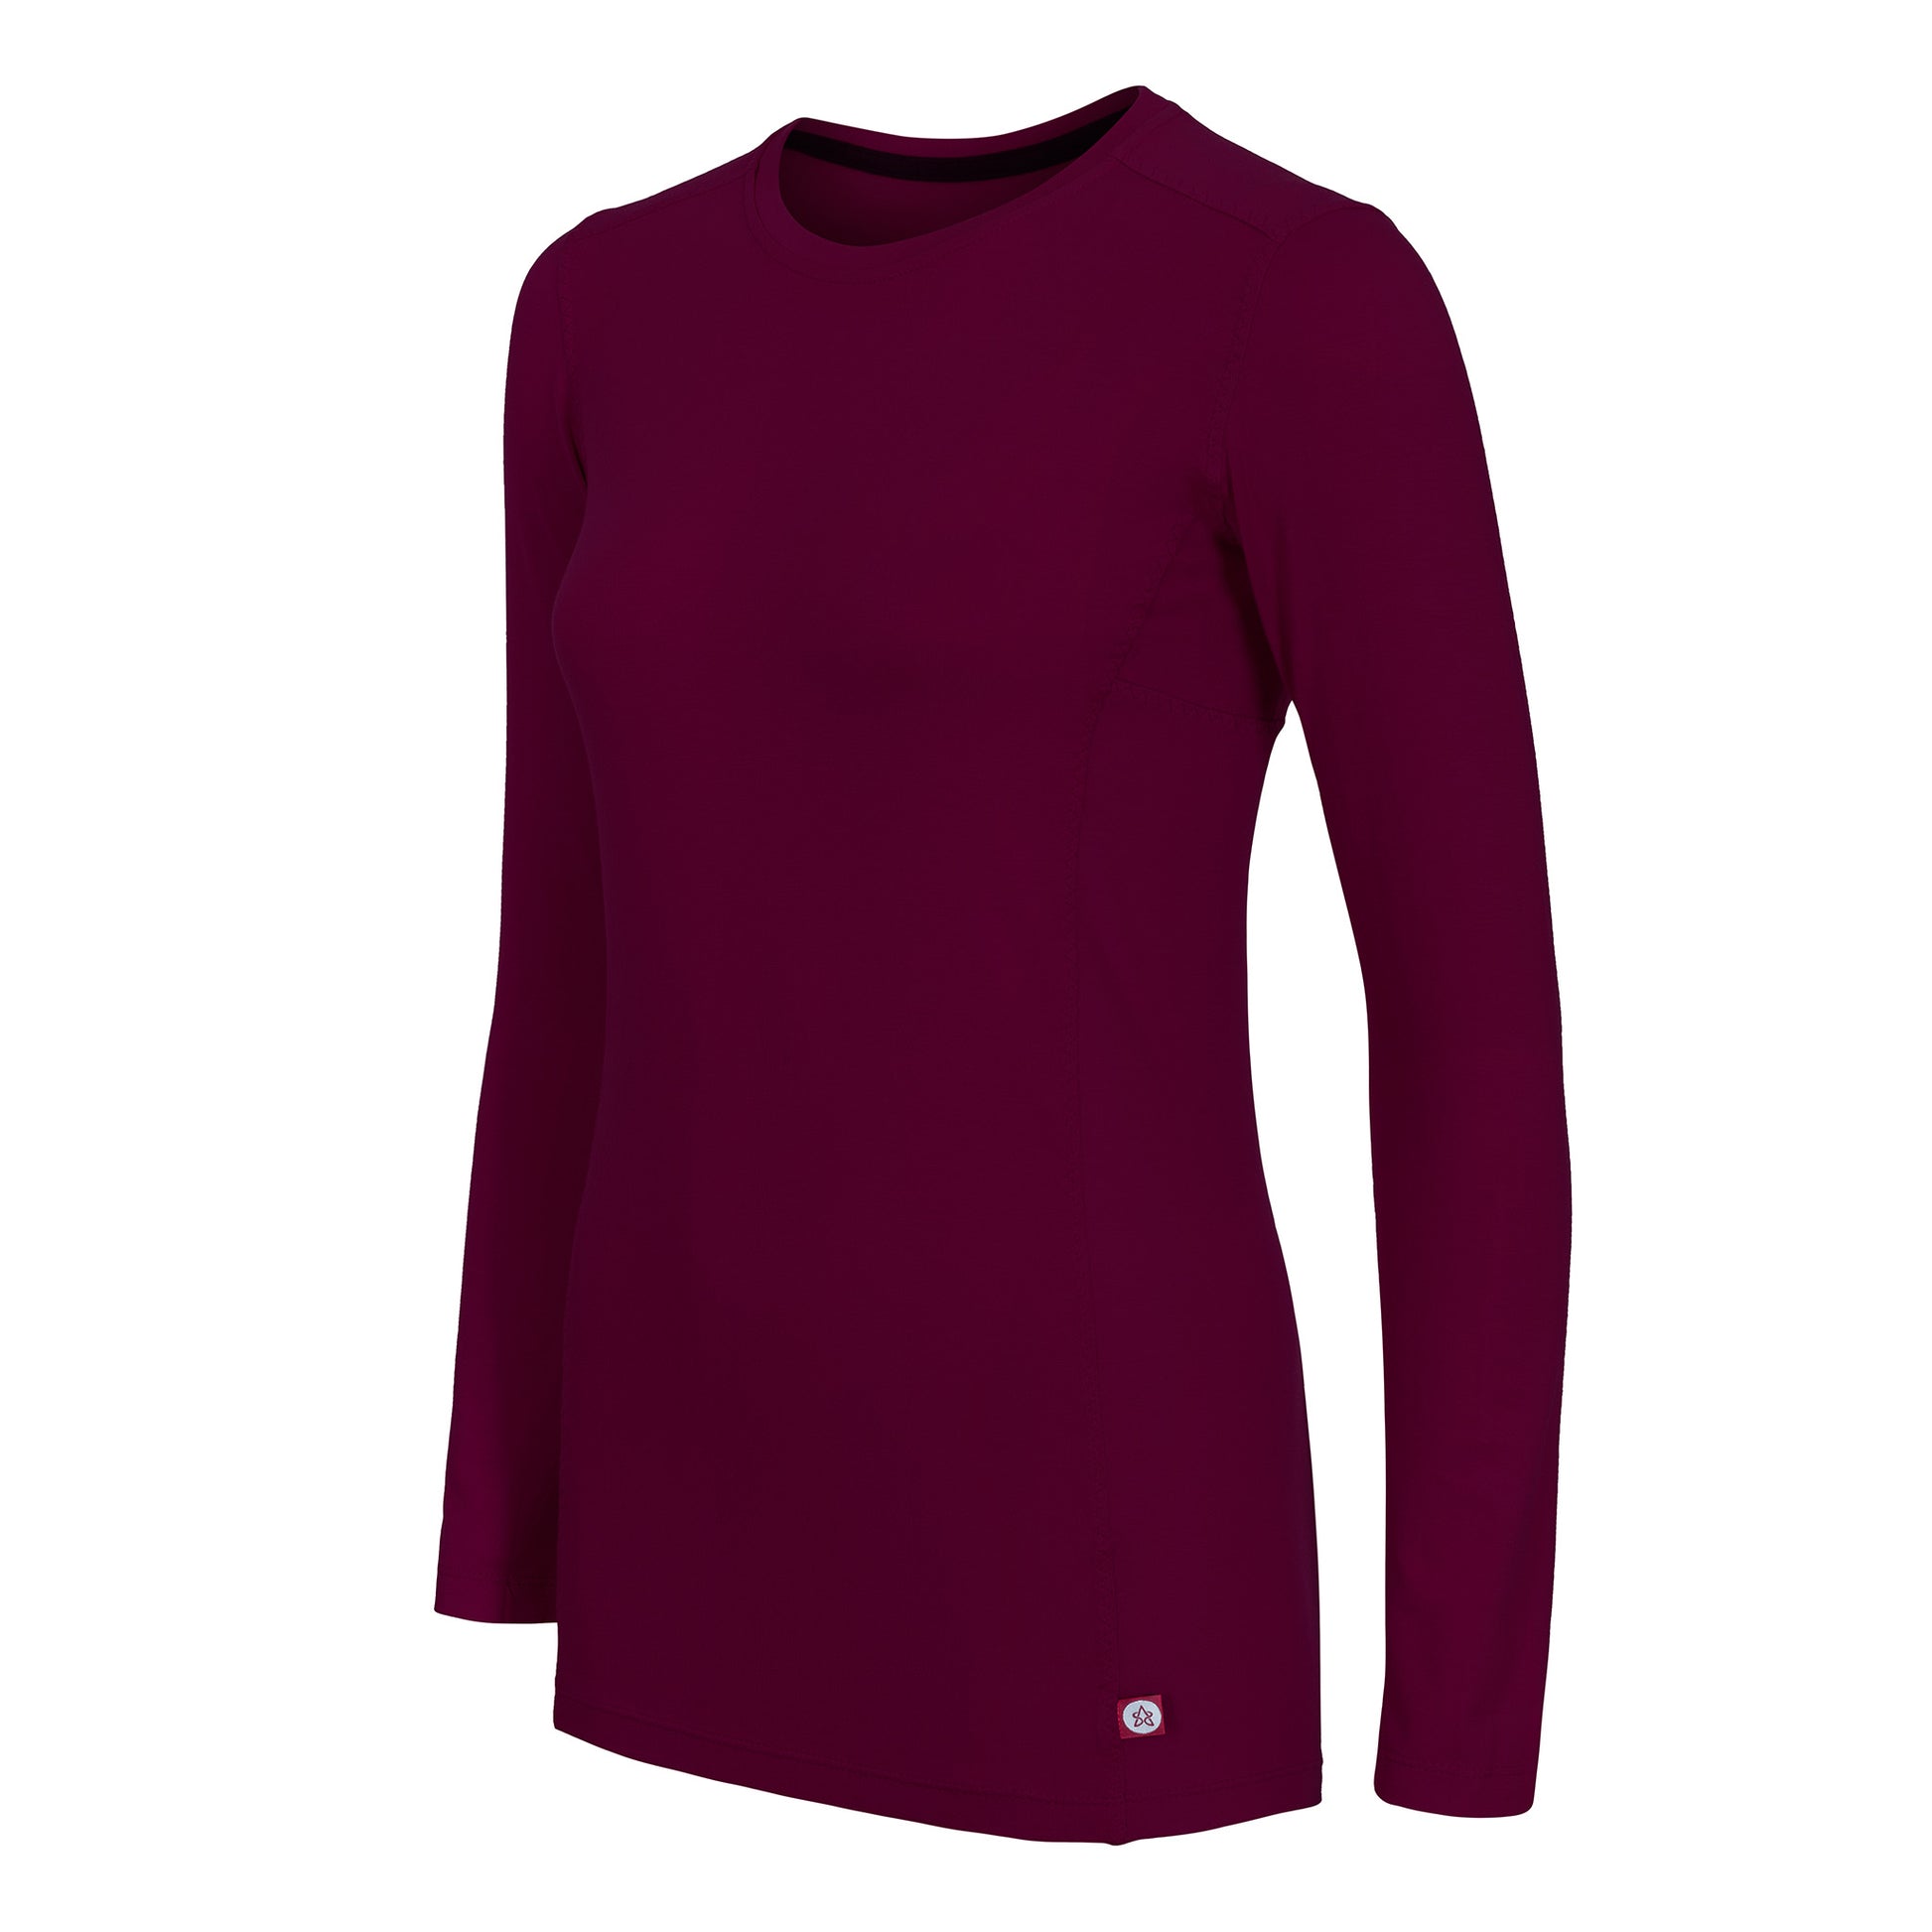 Mens Base Layer Tops, Technical T-shirts, Vests & Thermal Base Layers –  Page 2 – Montane - UK